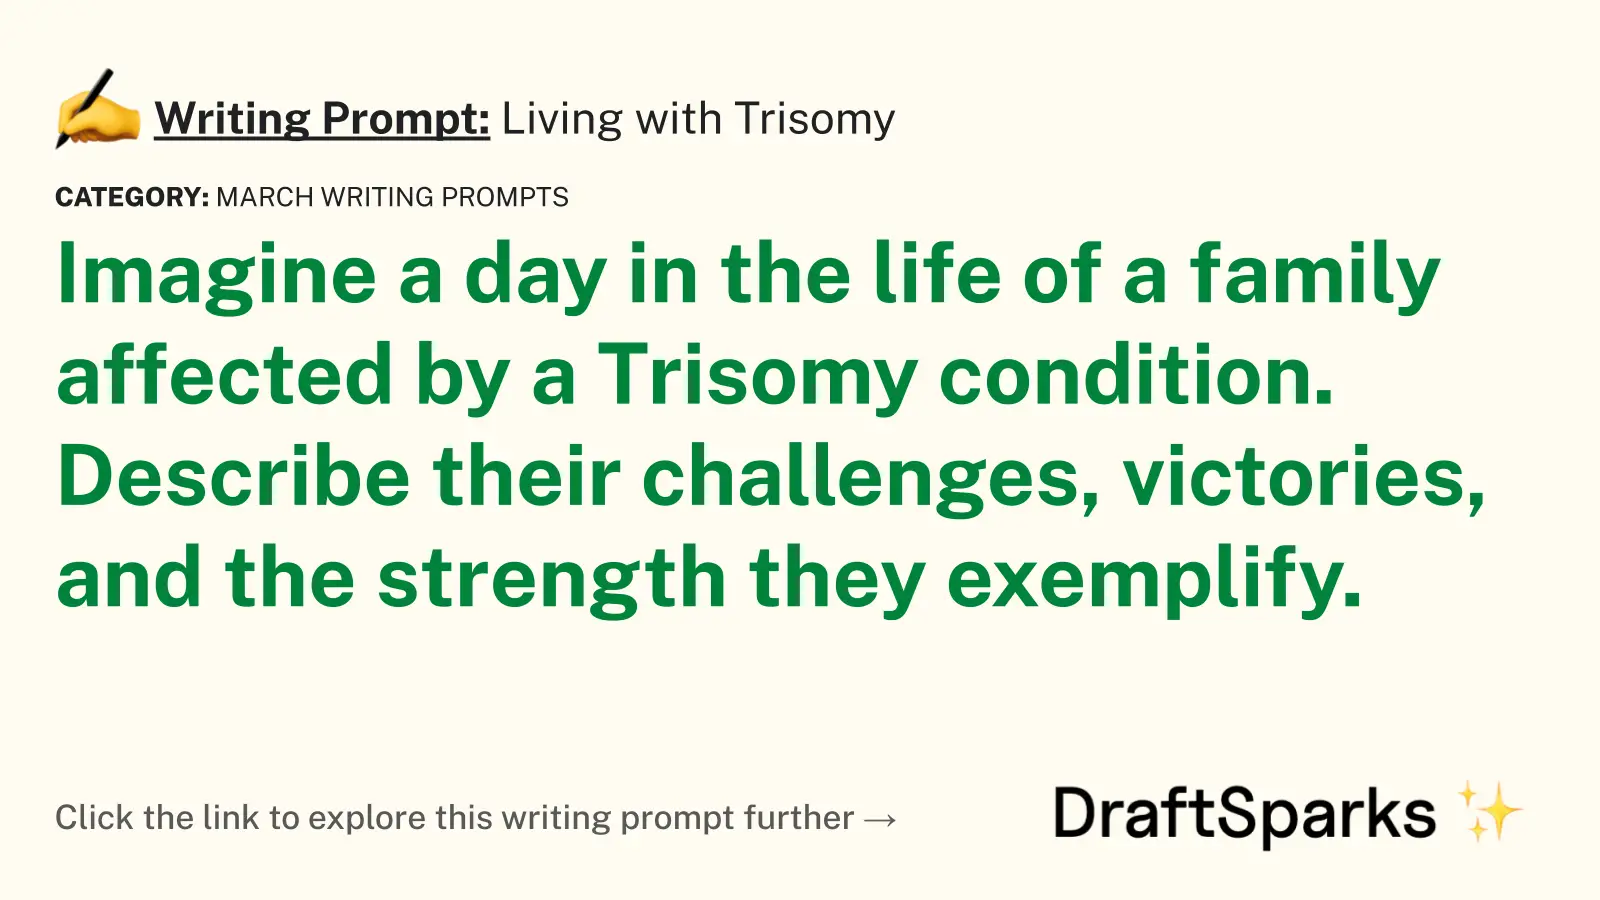 Living with Trisomy